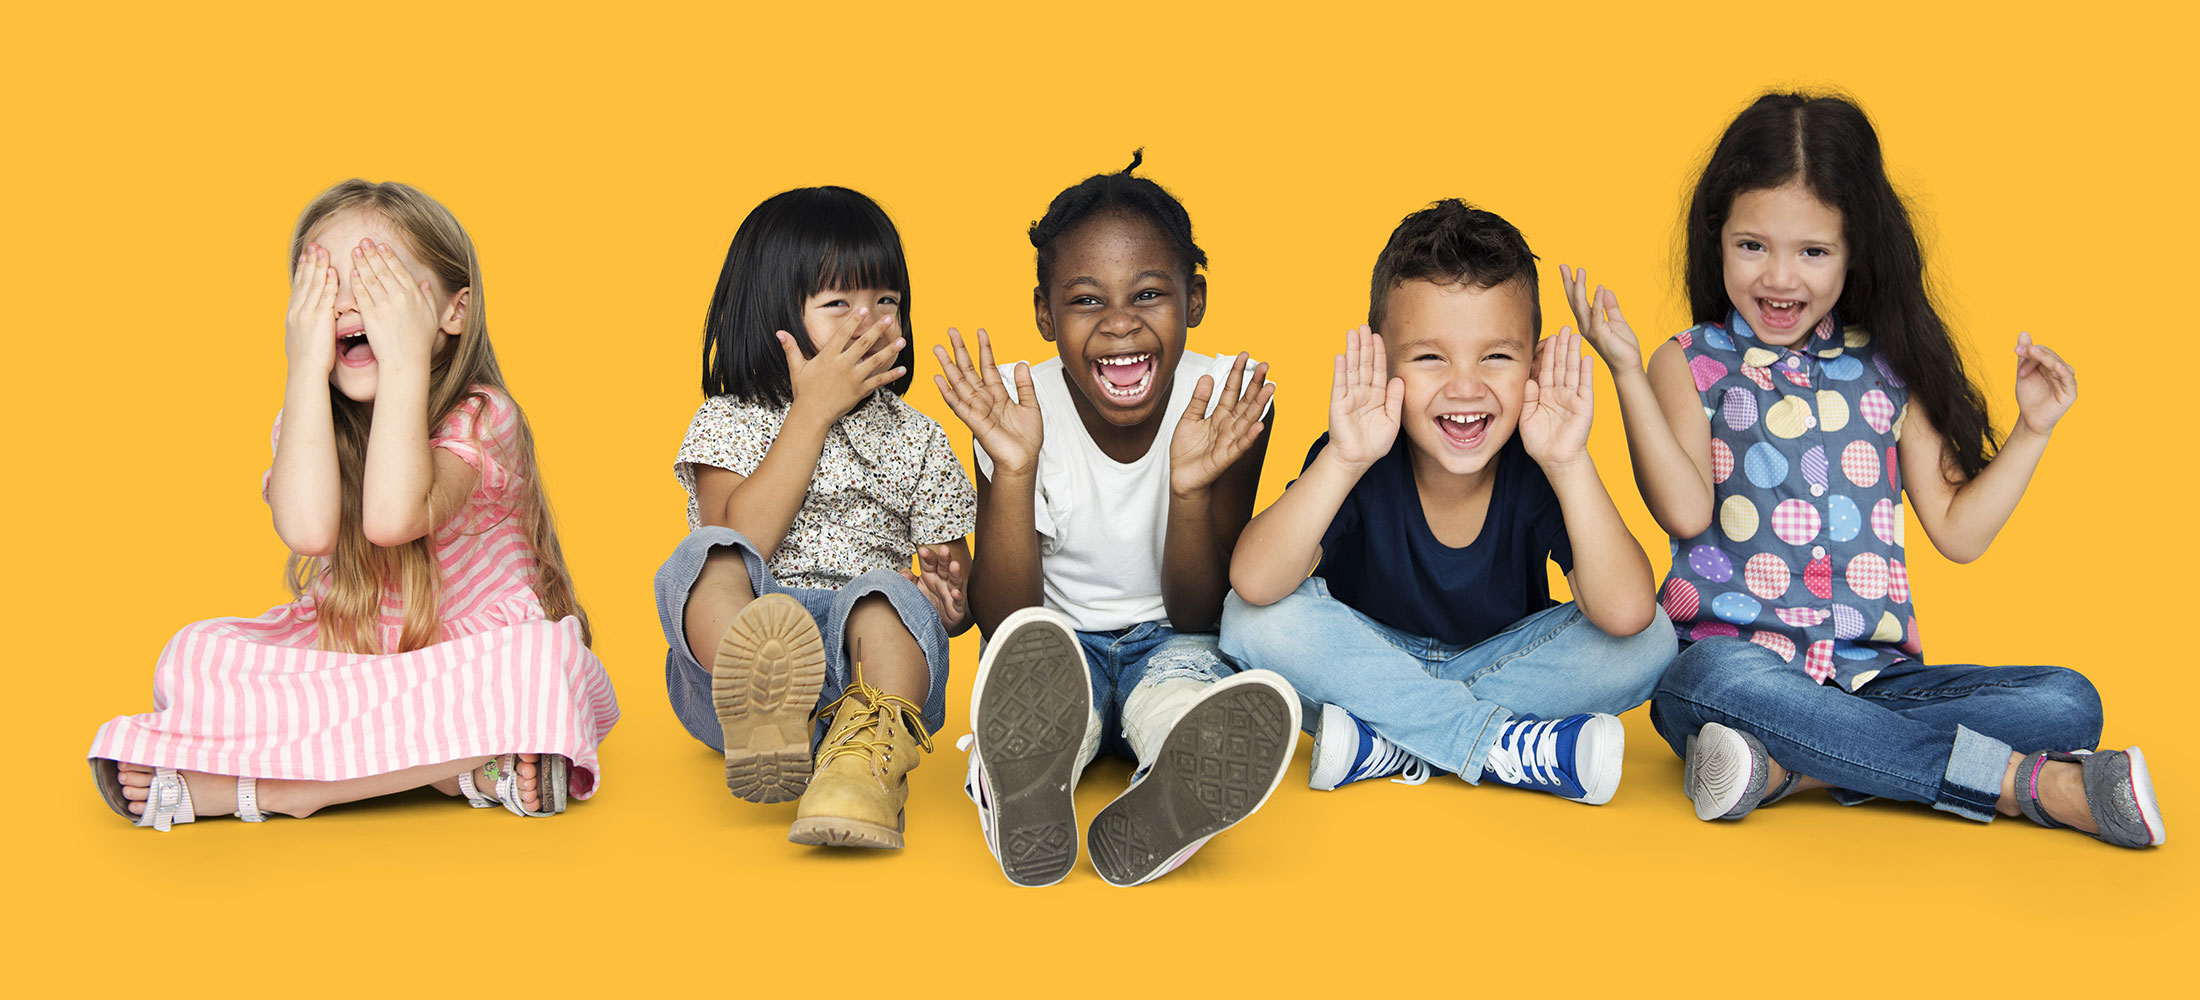 kids on yellow background